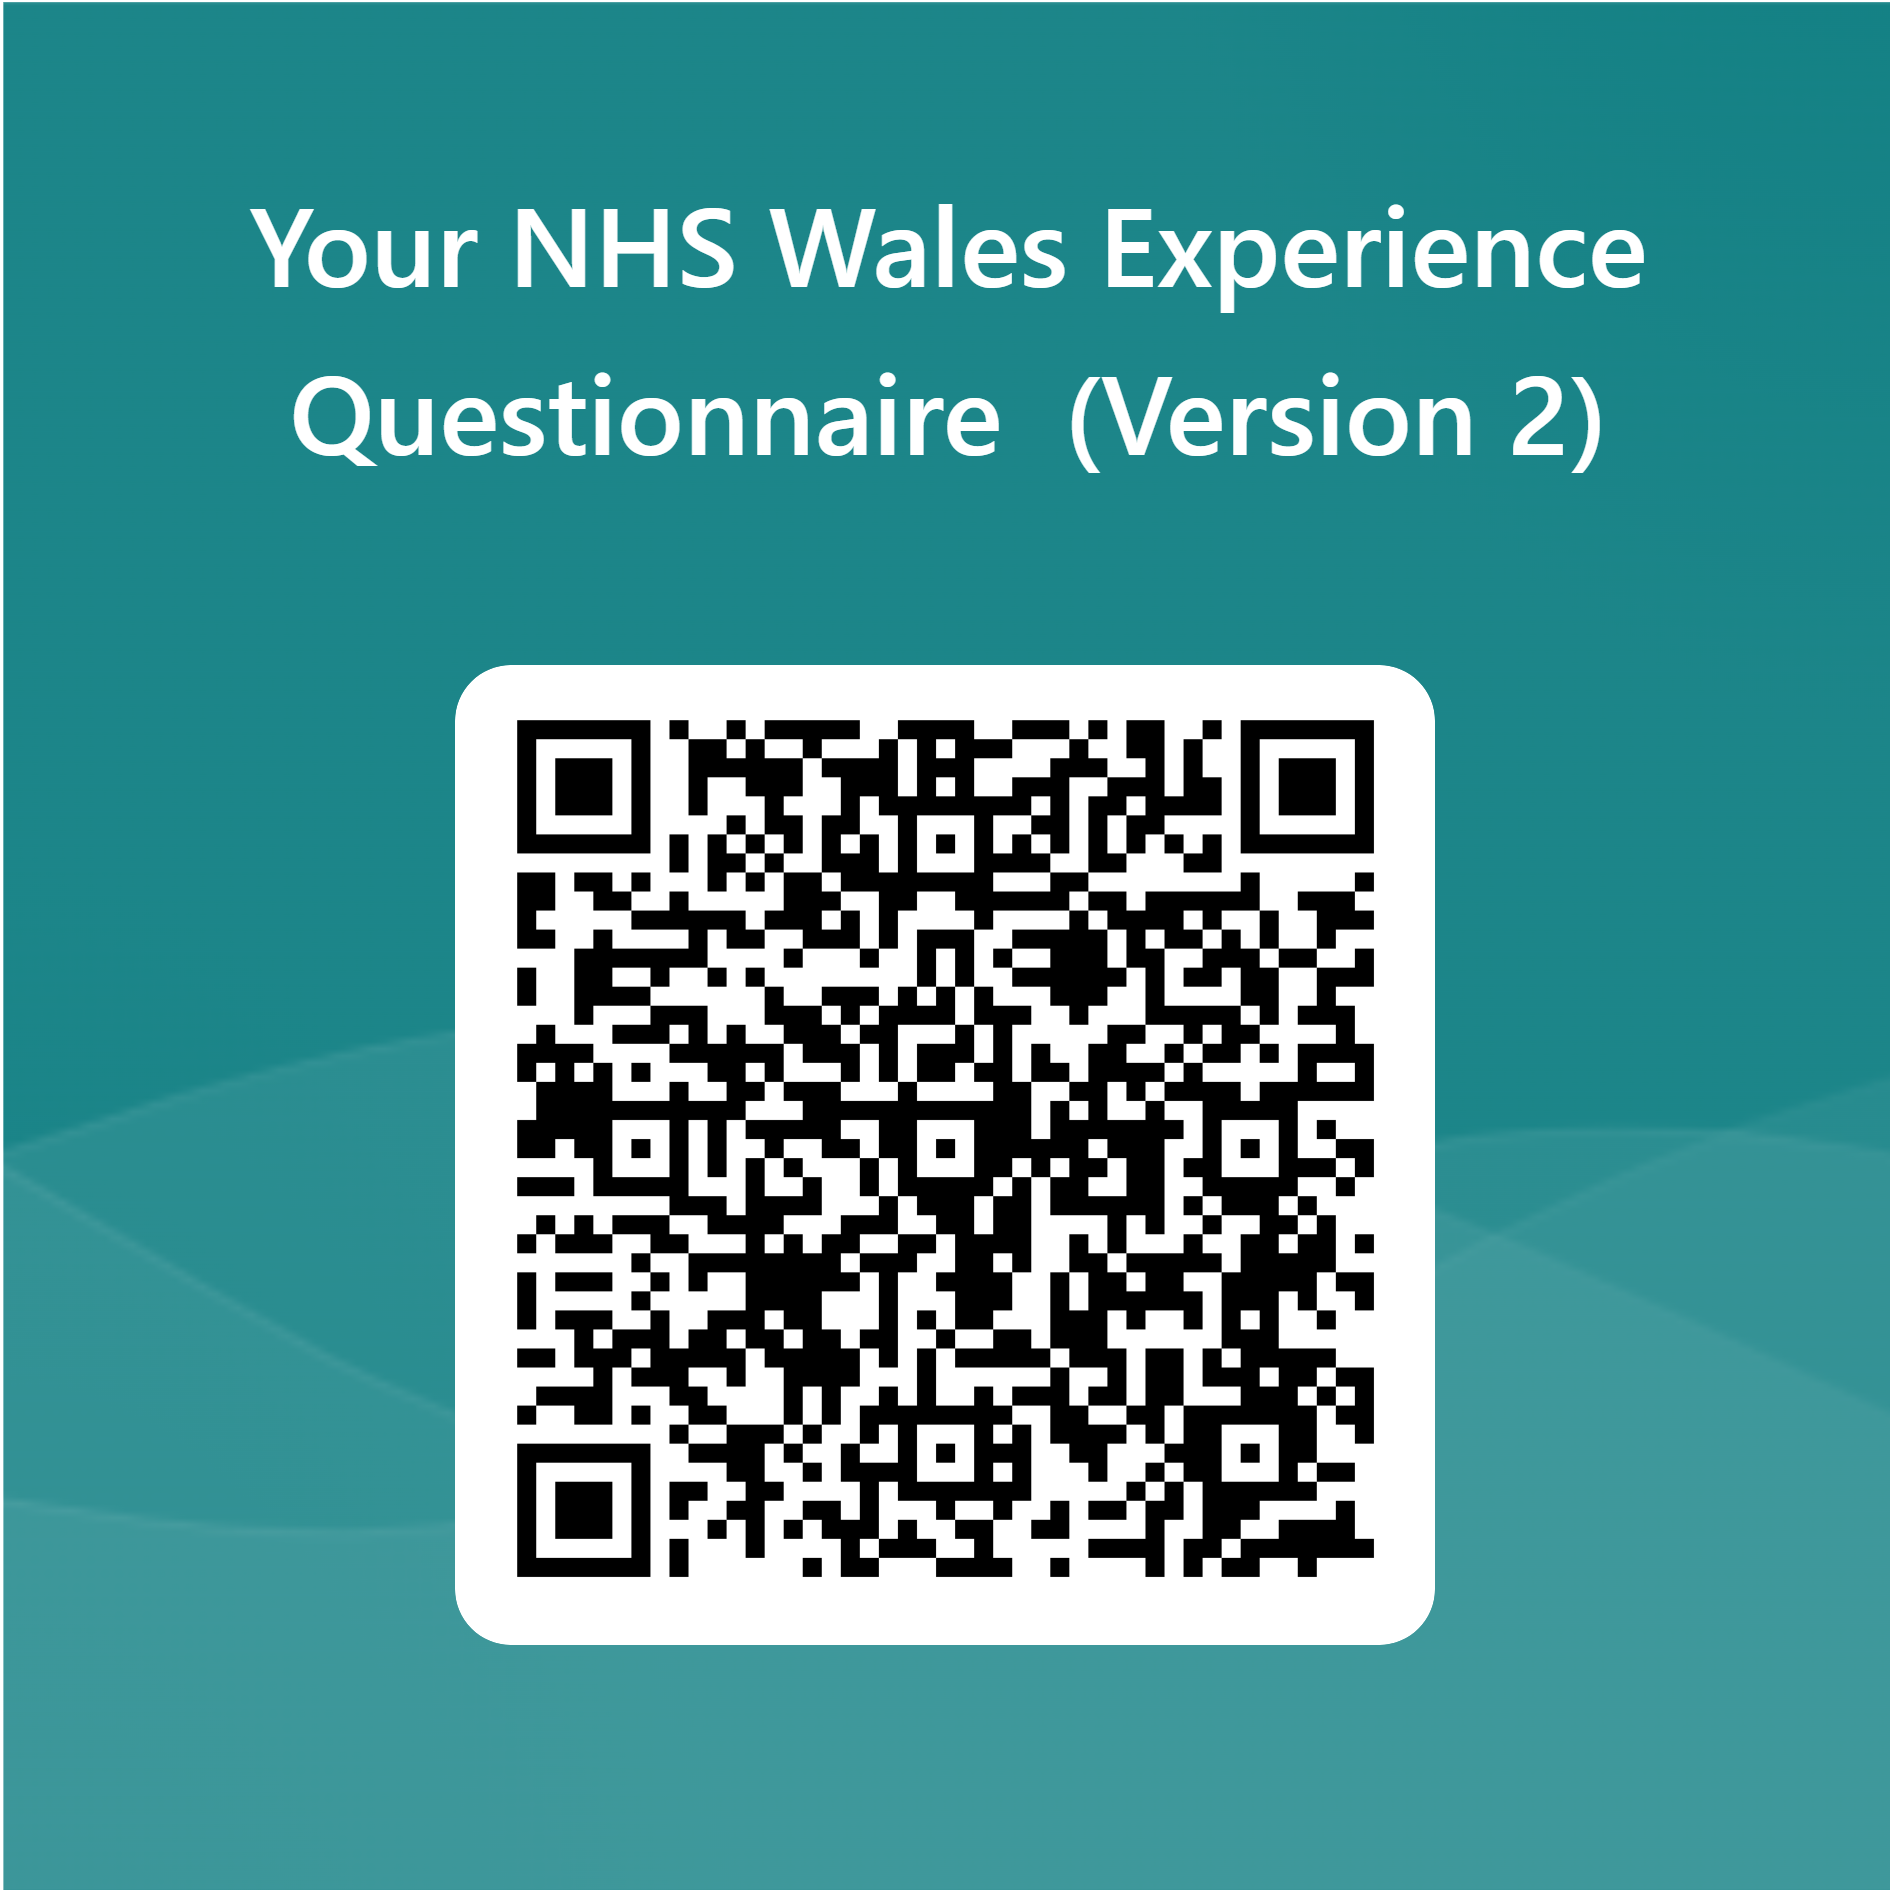 QR CODE FOR NHS PATINET QUESTIONNAIRE